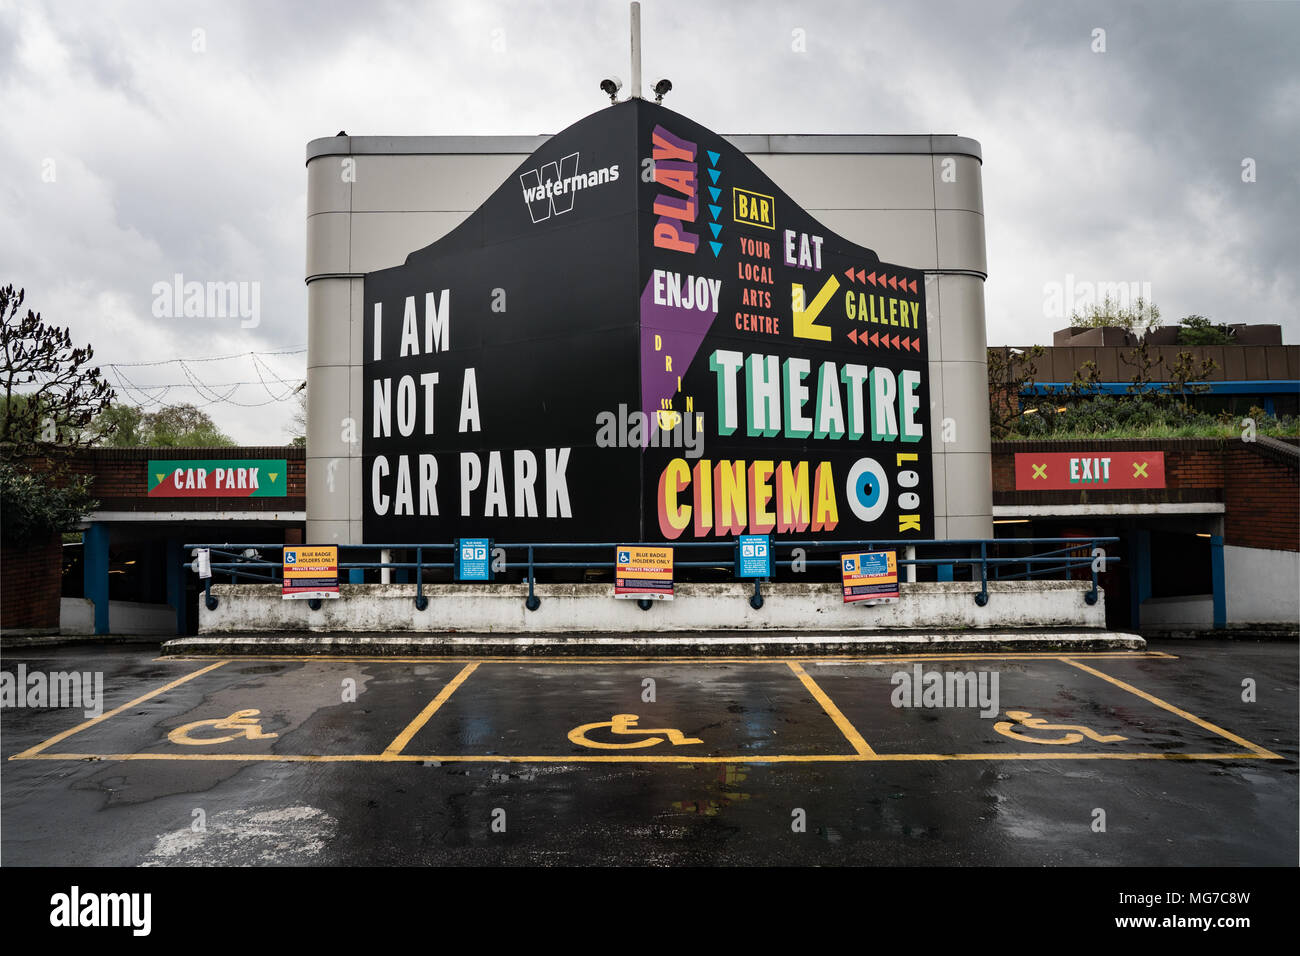 Views of The Watermans Arts Centre (displaying a newly installed sign 'I Am Not A Car Park') in Brentford , London. Photo date: Friday, April 27, 2018 Stock Photo